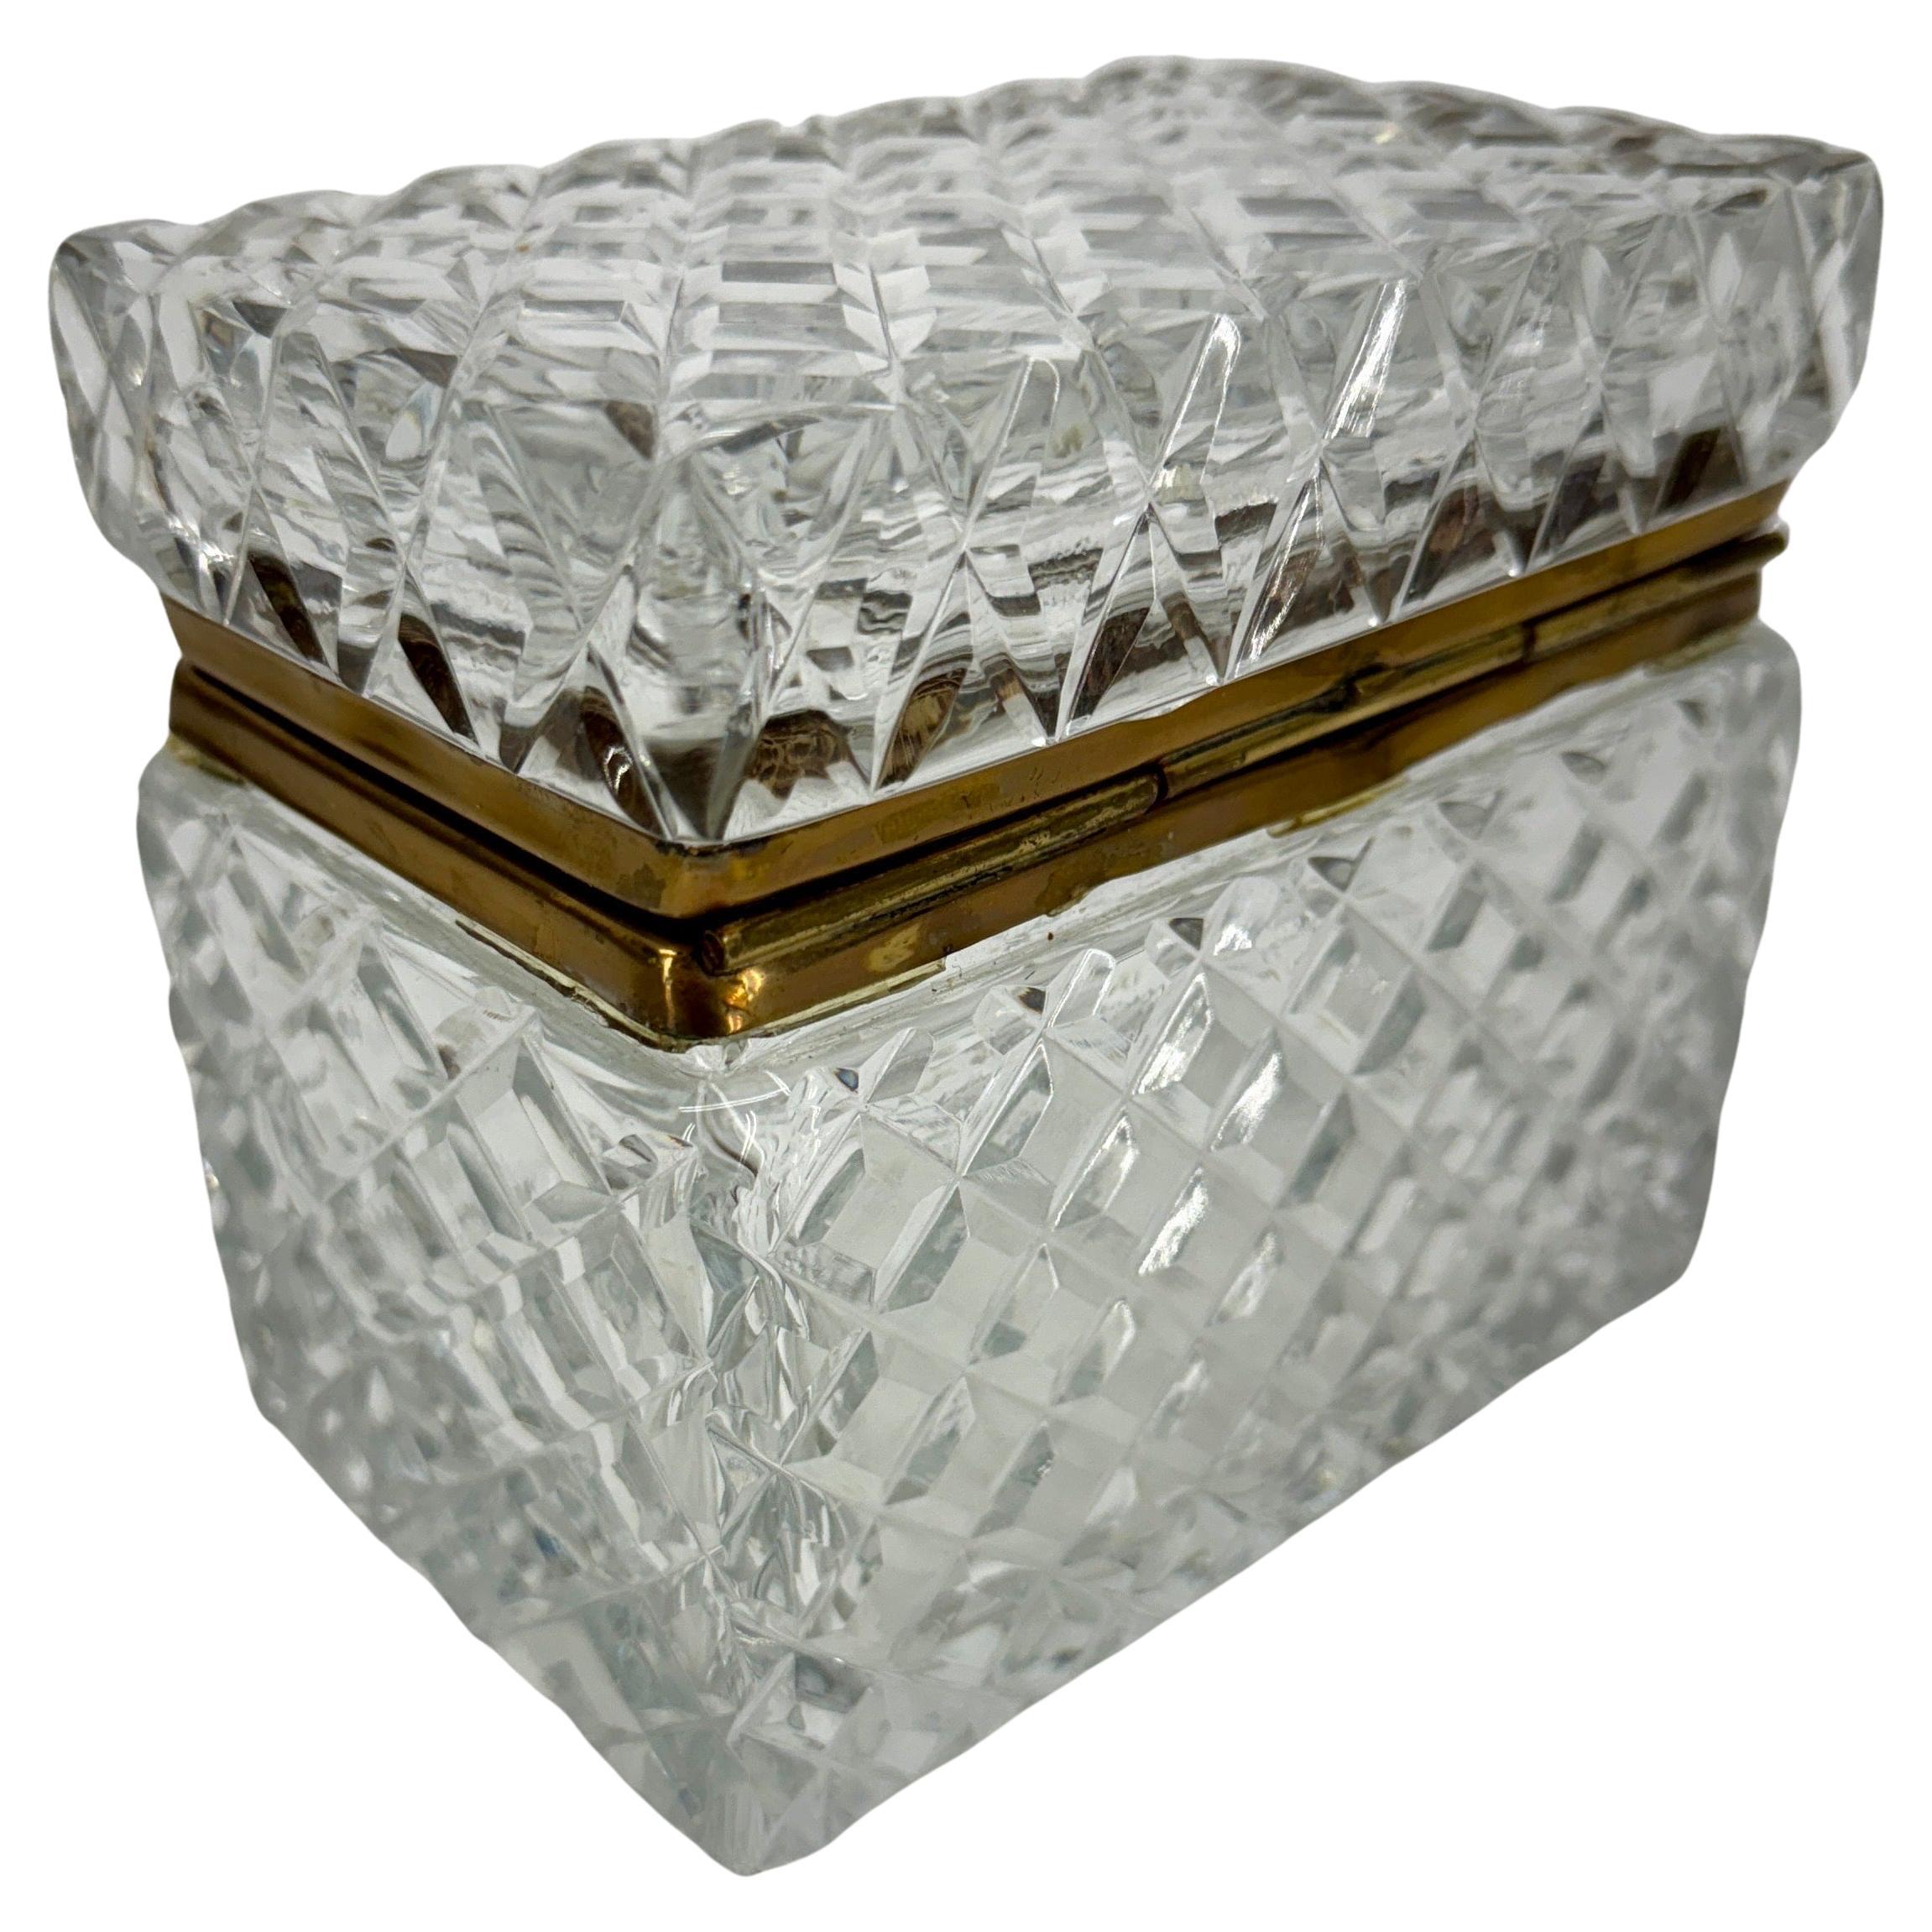 20th Century Rectangular Baccarat Style Cut Crystal Lidded Box with Brass Hardware For Sale